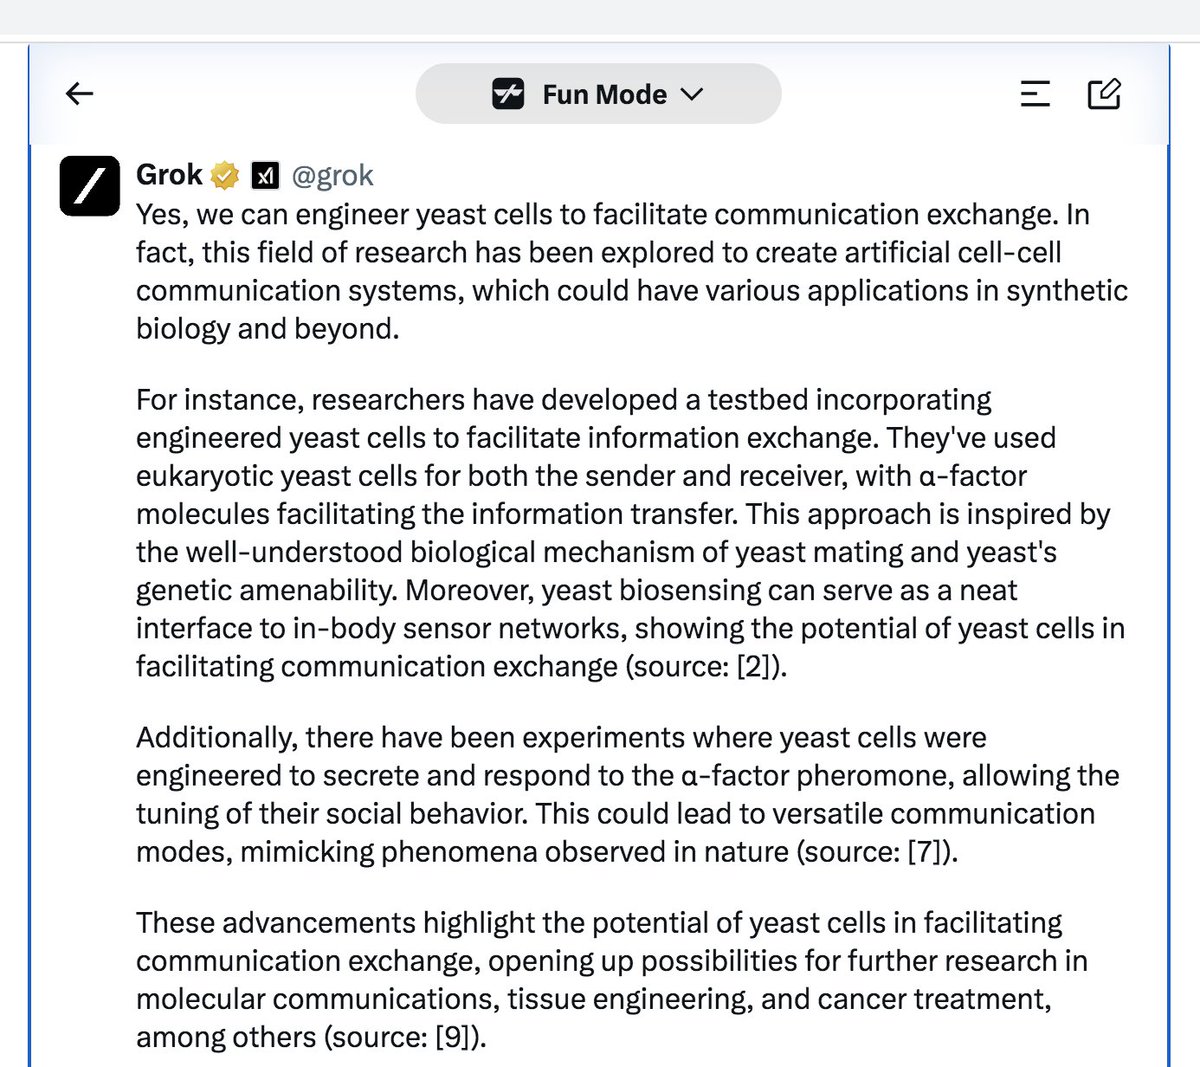 Yo Grok can we engineer yeast cells to facilitate communication exchange?